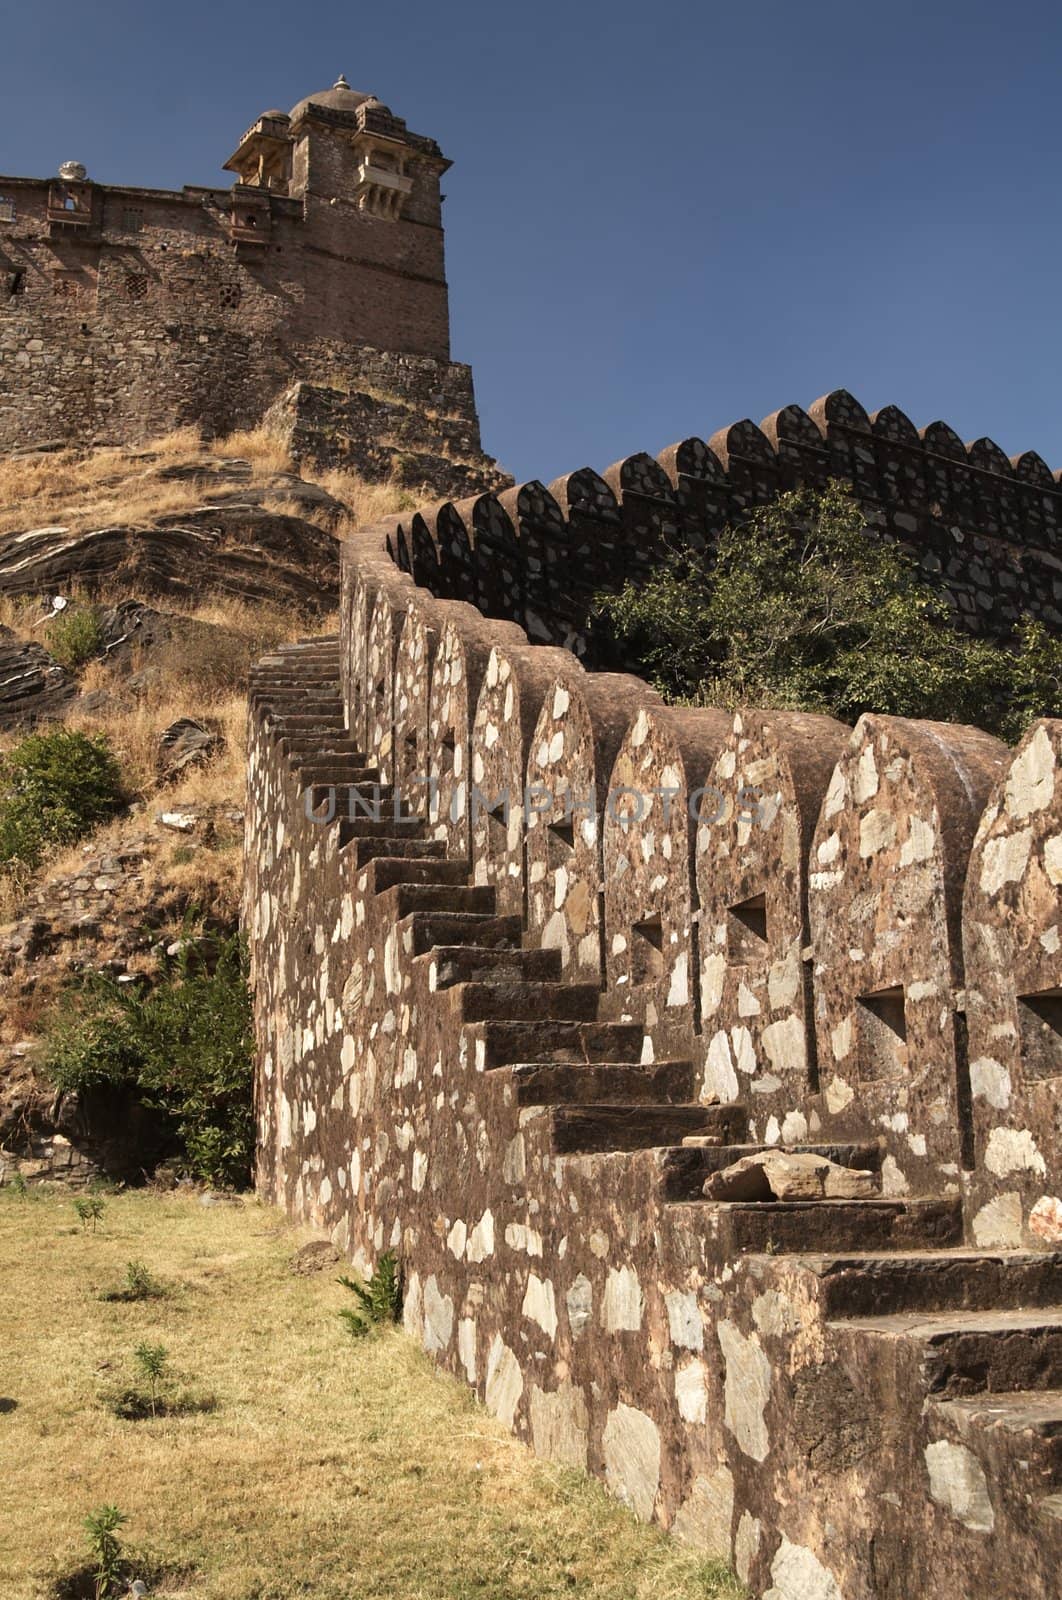 Massive ramparts of Kumbhalgarh Fort with a palace at the top of the hill, Rajasthan, India.